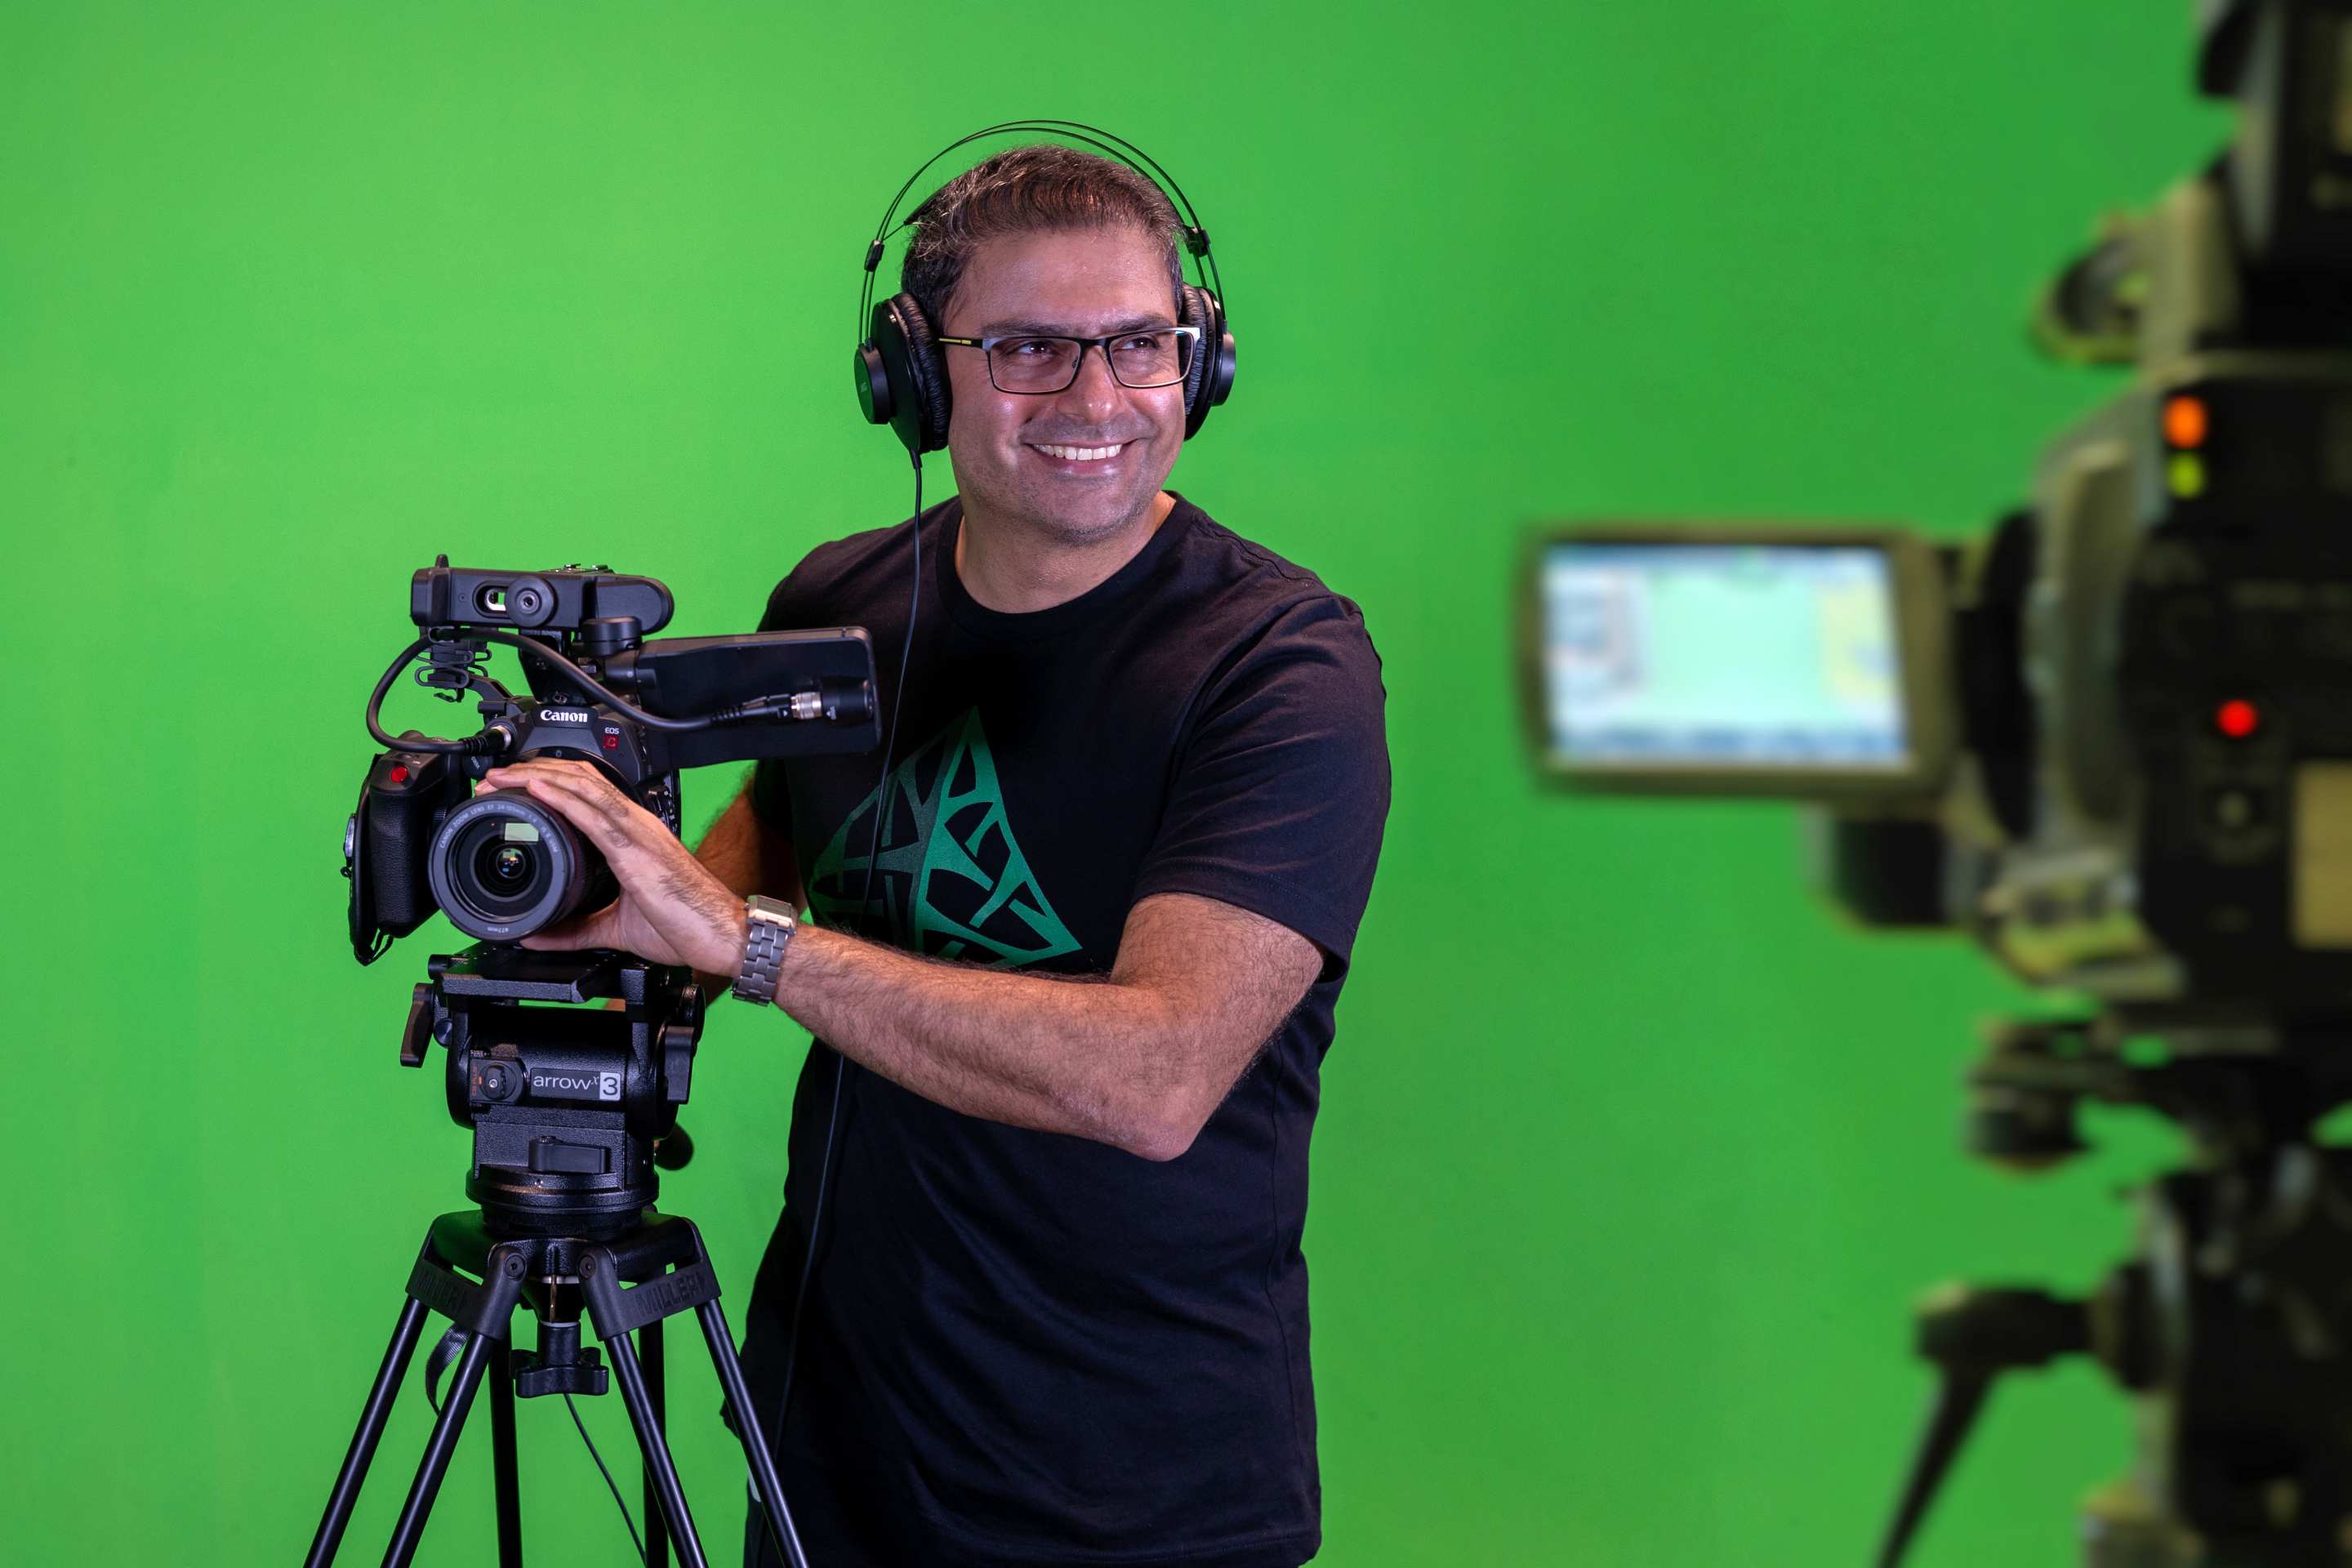 Reza in front of a green screen wearing a headset and holding on to a camera.